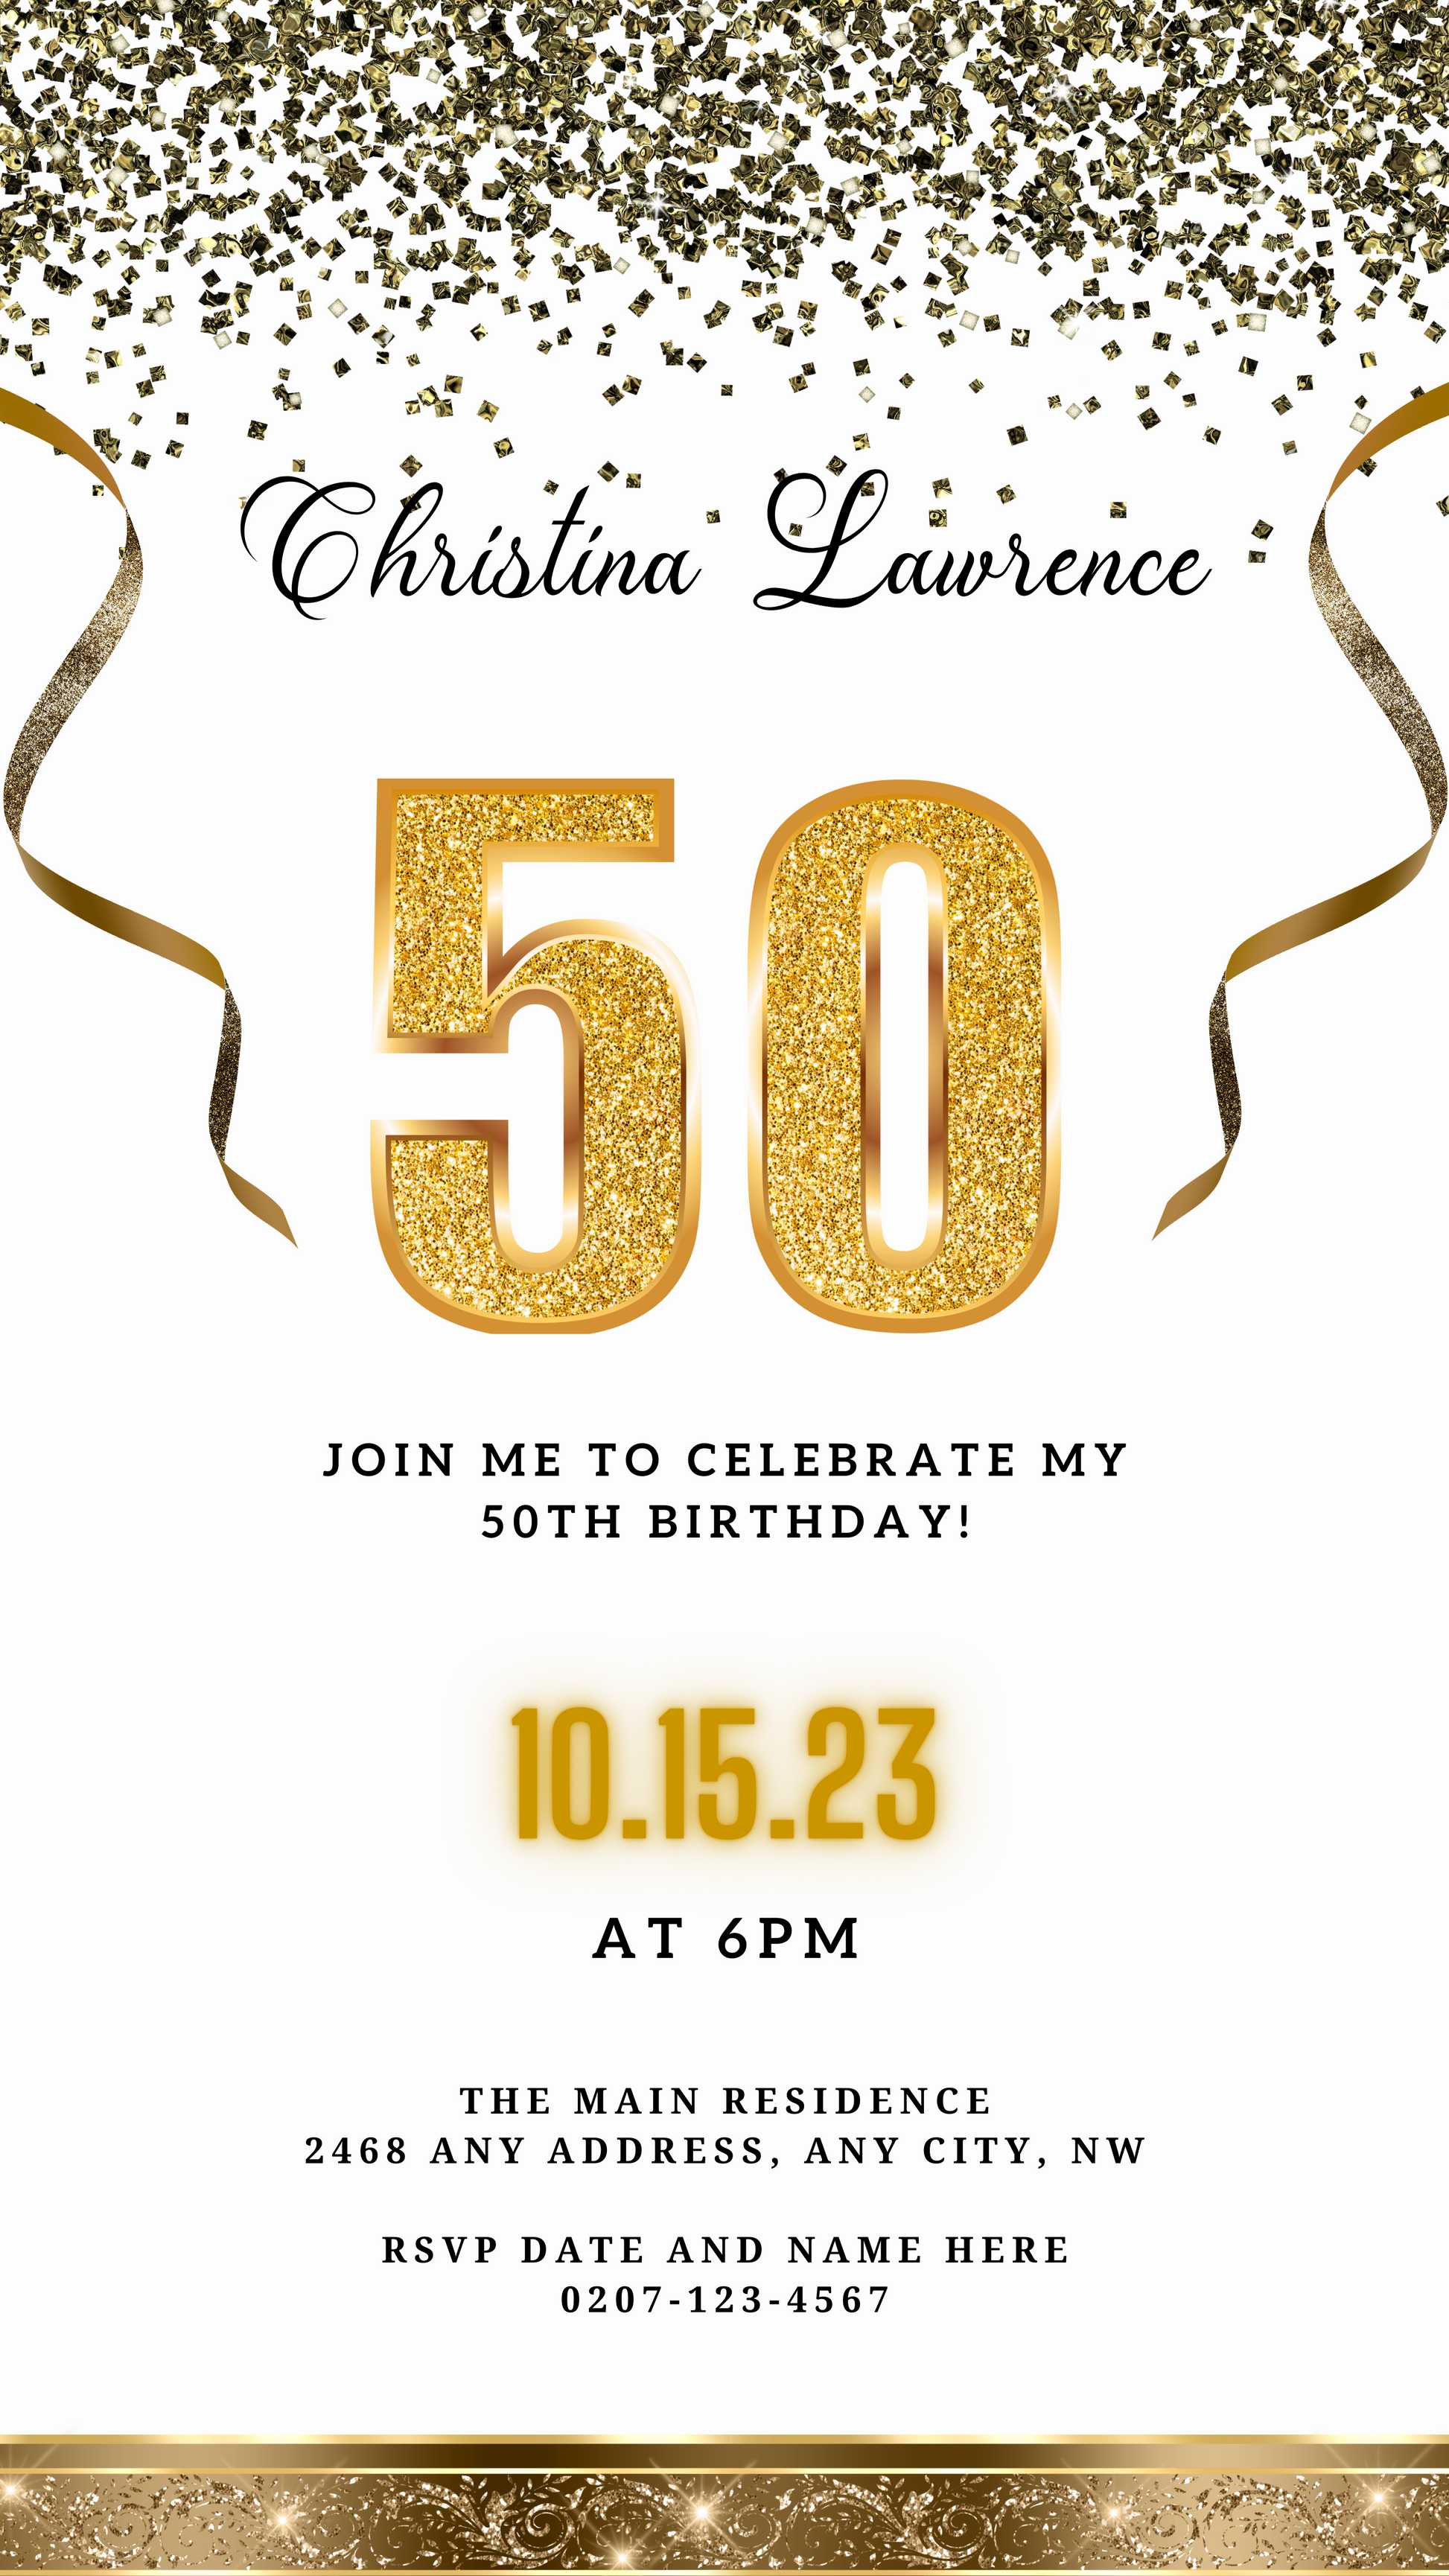 Customizable Digital White Gold Confetti 50th Birthday Evite featuring gold numbers and glittery ribbons on a white background. Download and edit via Canva for easy sharing.